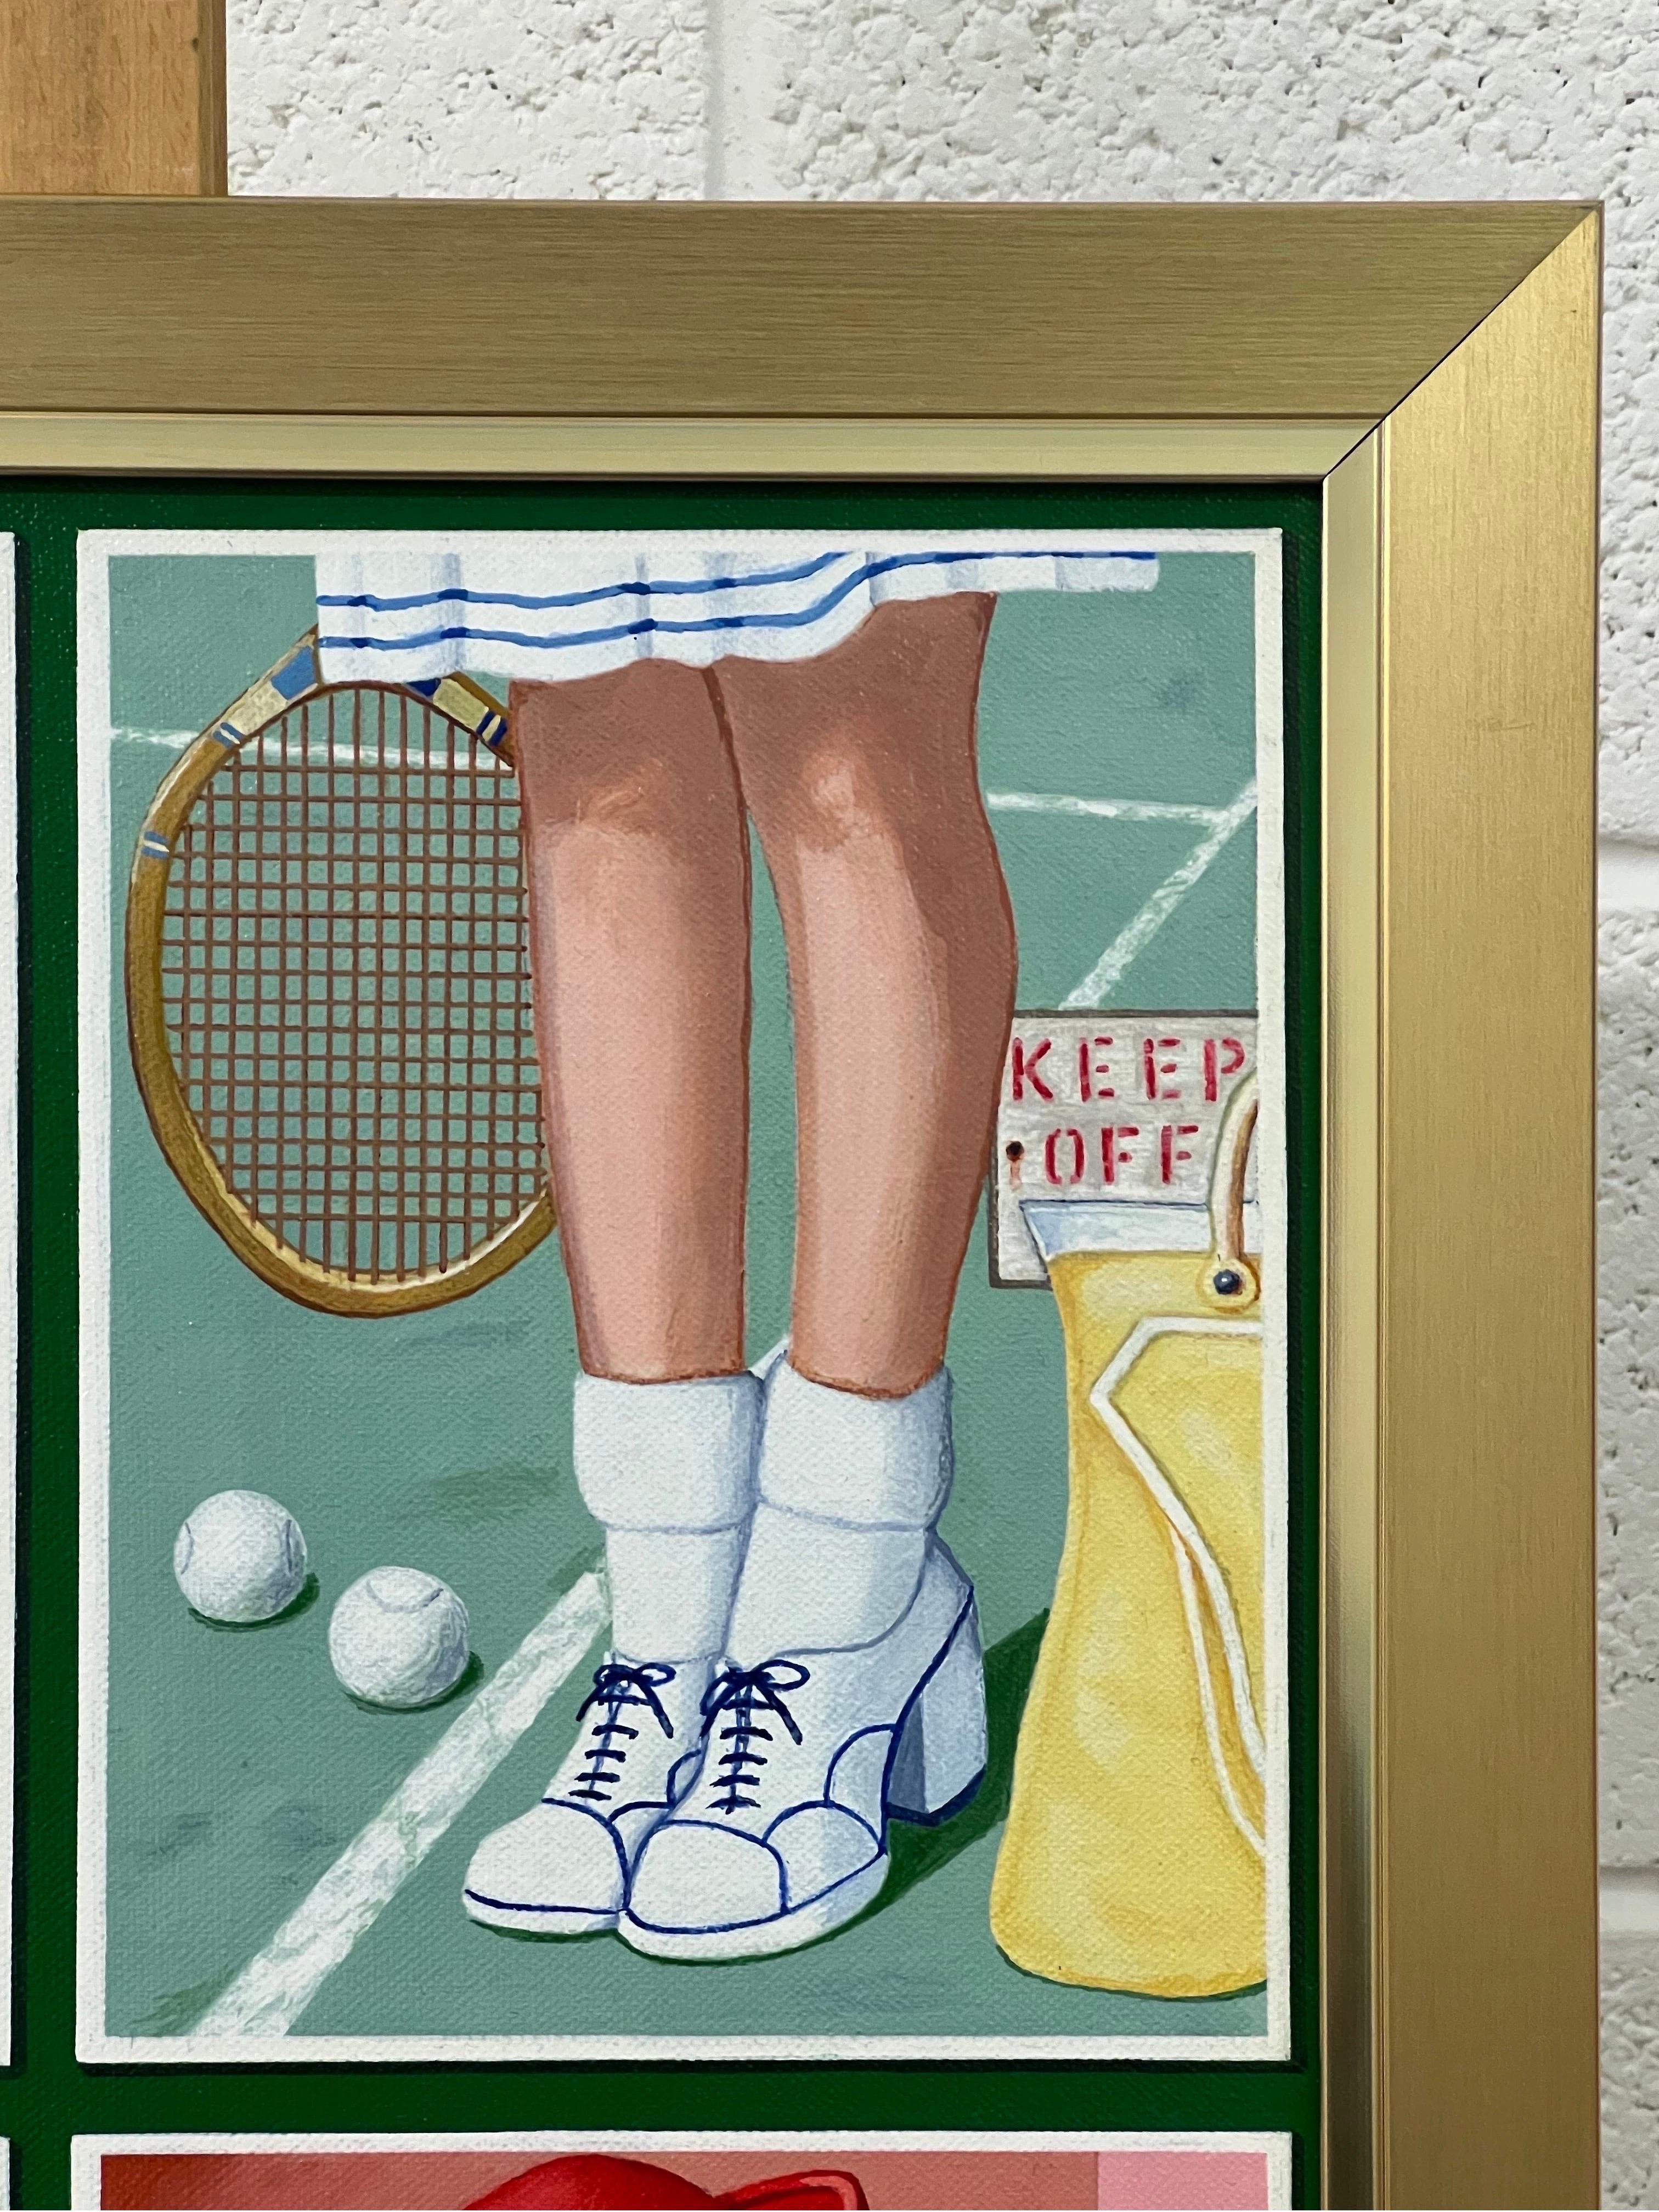 Vintage English Woman Tennis Player Picnic Basket Smoking 1960's 1970's England entitled ‘Love, Hate, Kiss, Or Adore’ by Retro Nostalgic Artist, Paul F Harding. Signed, Original, Oil on Canvas. Presented in a gold frame.

Art measures 20 x 16